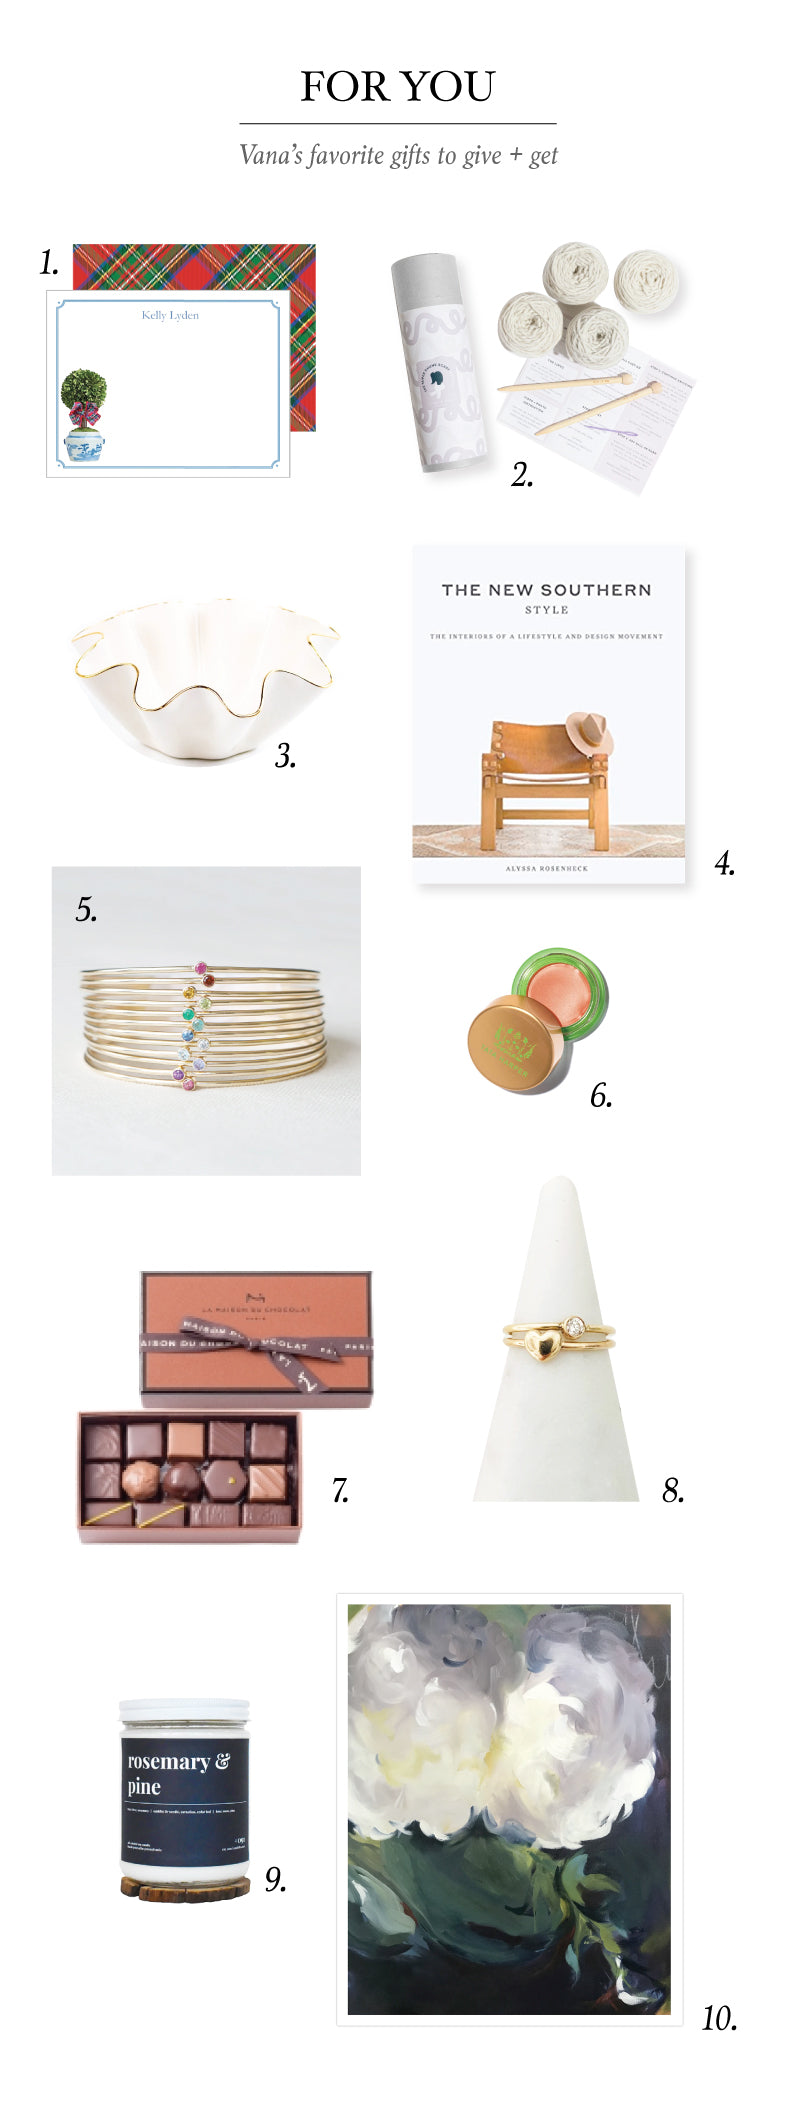 2020 Gift Guide - Vana's Favorite Things to Gift + Get